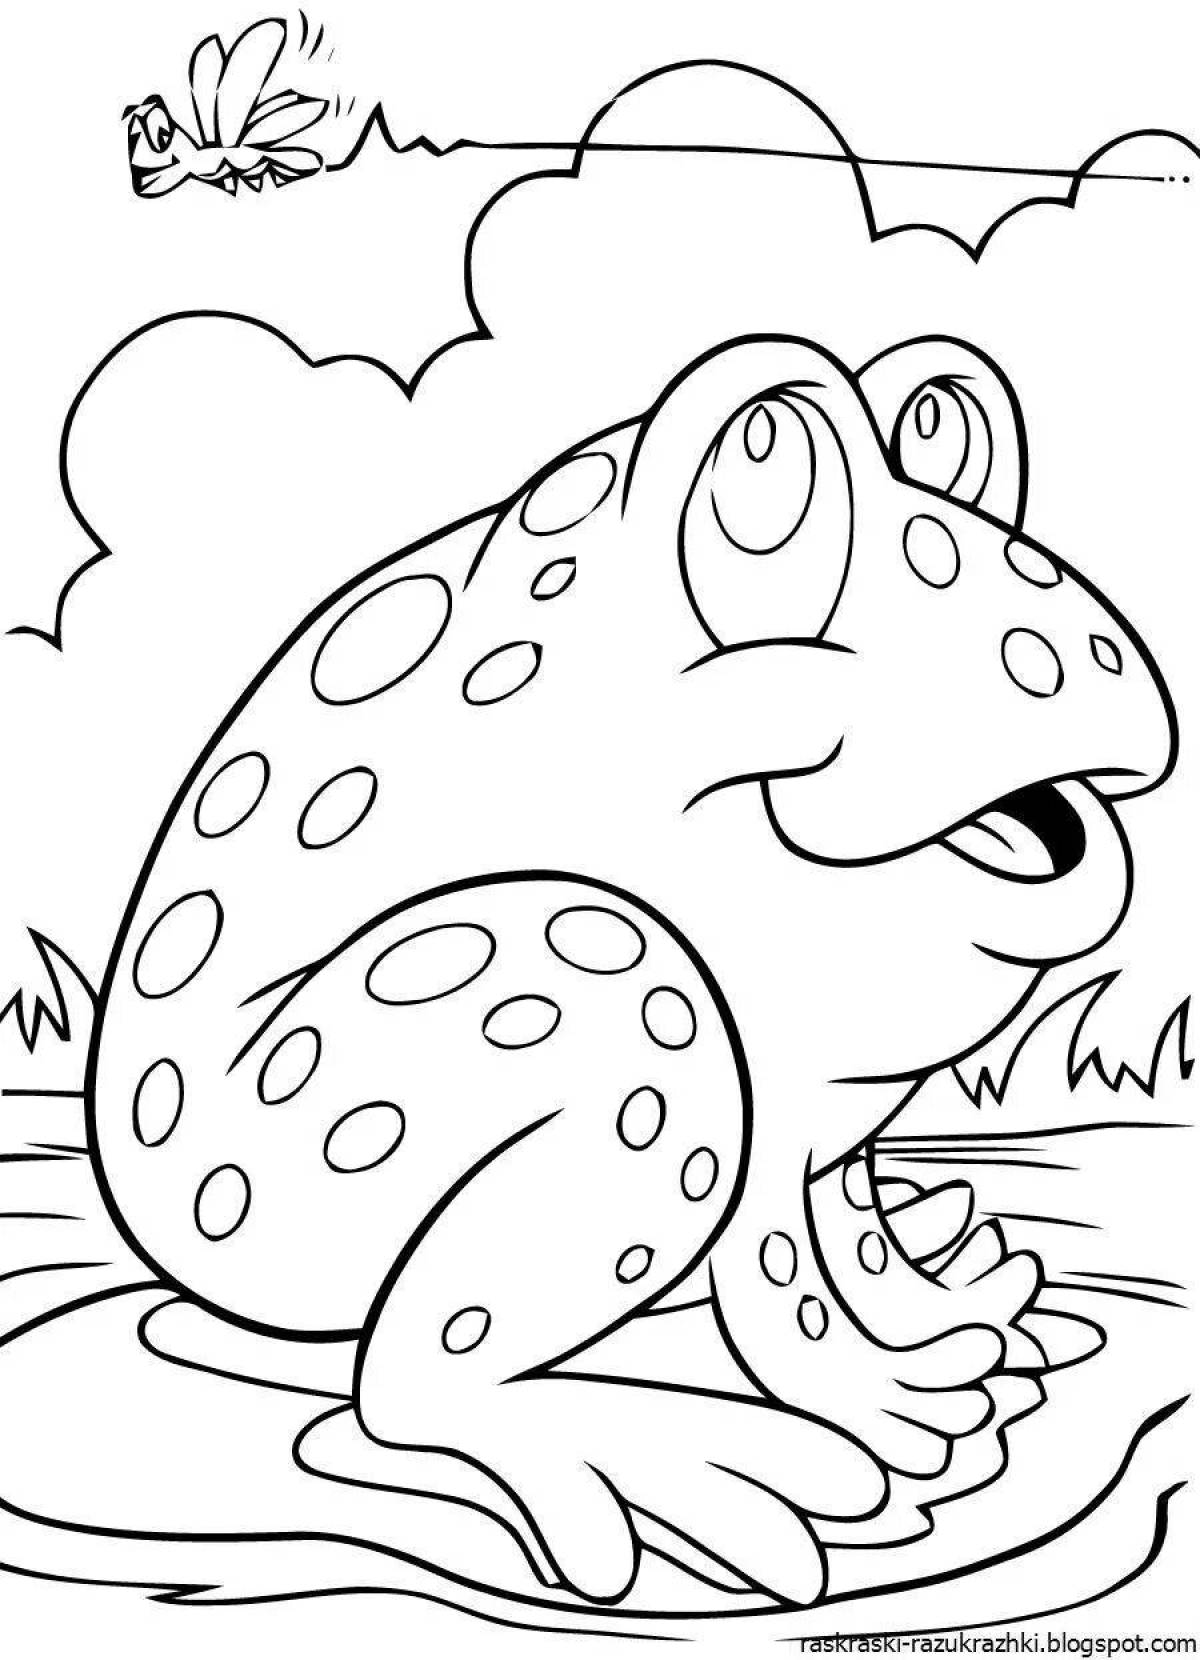 Radiant animal coloring pages for kids 5-6 years old